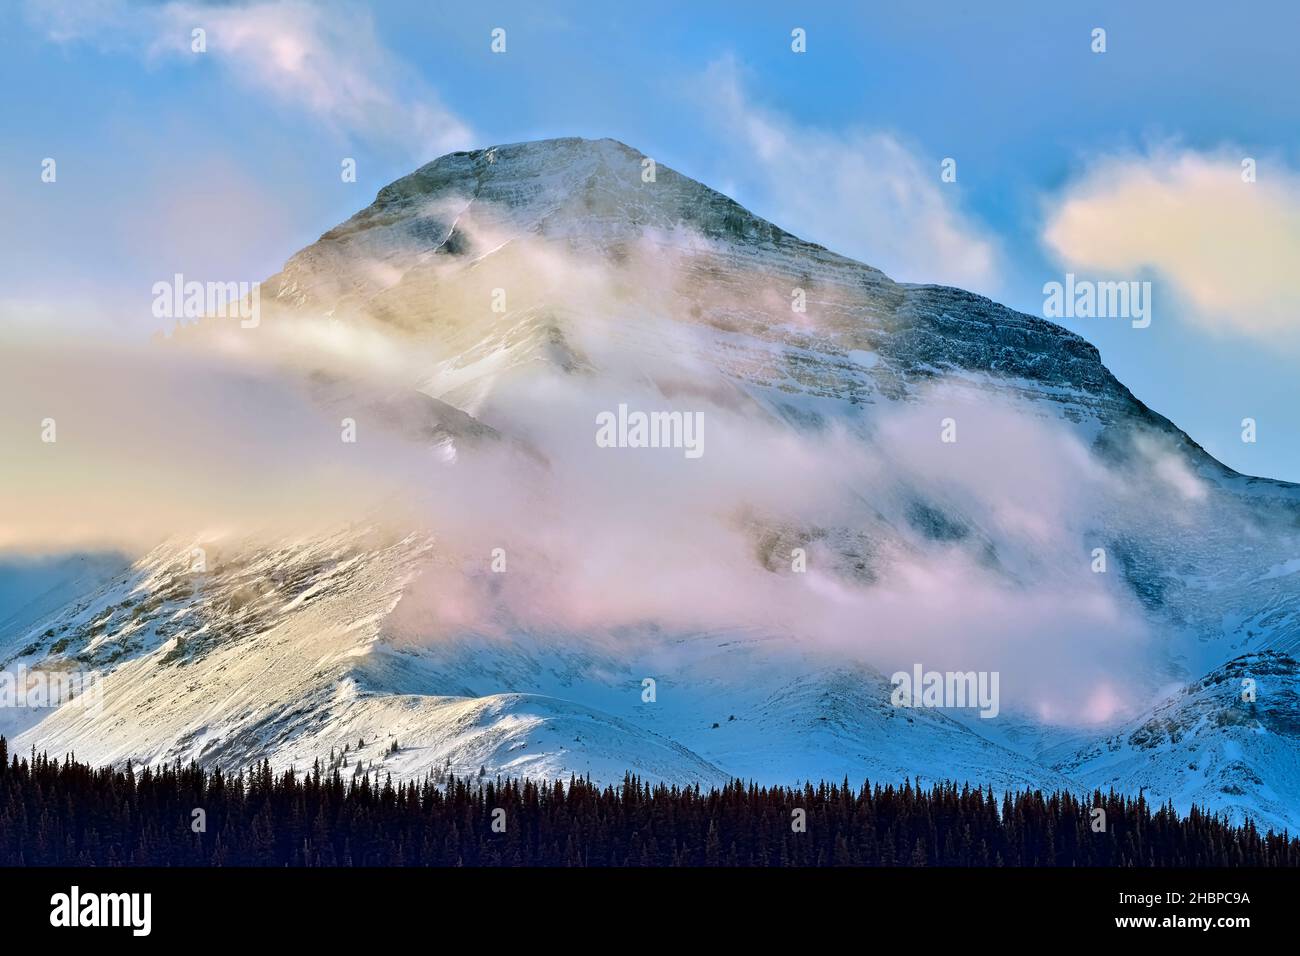 A close up image of a Rocky Mountain in rural Alberta Canada with a fresh winter snowfall. Stock Photo